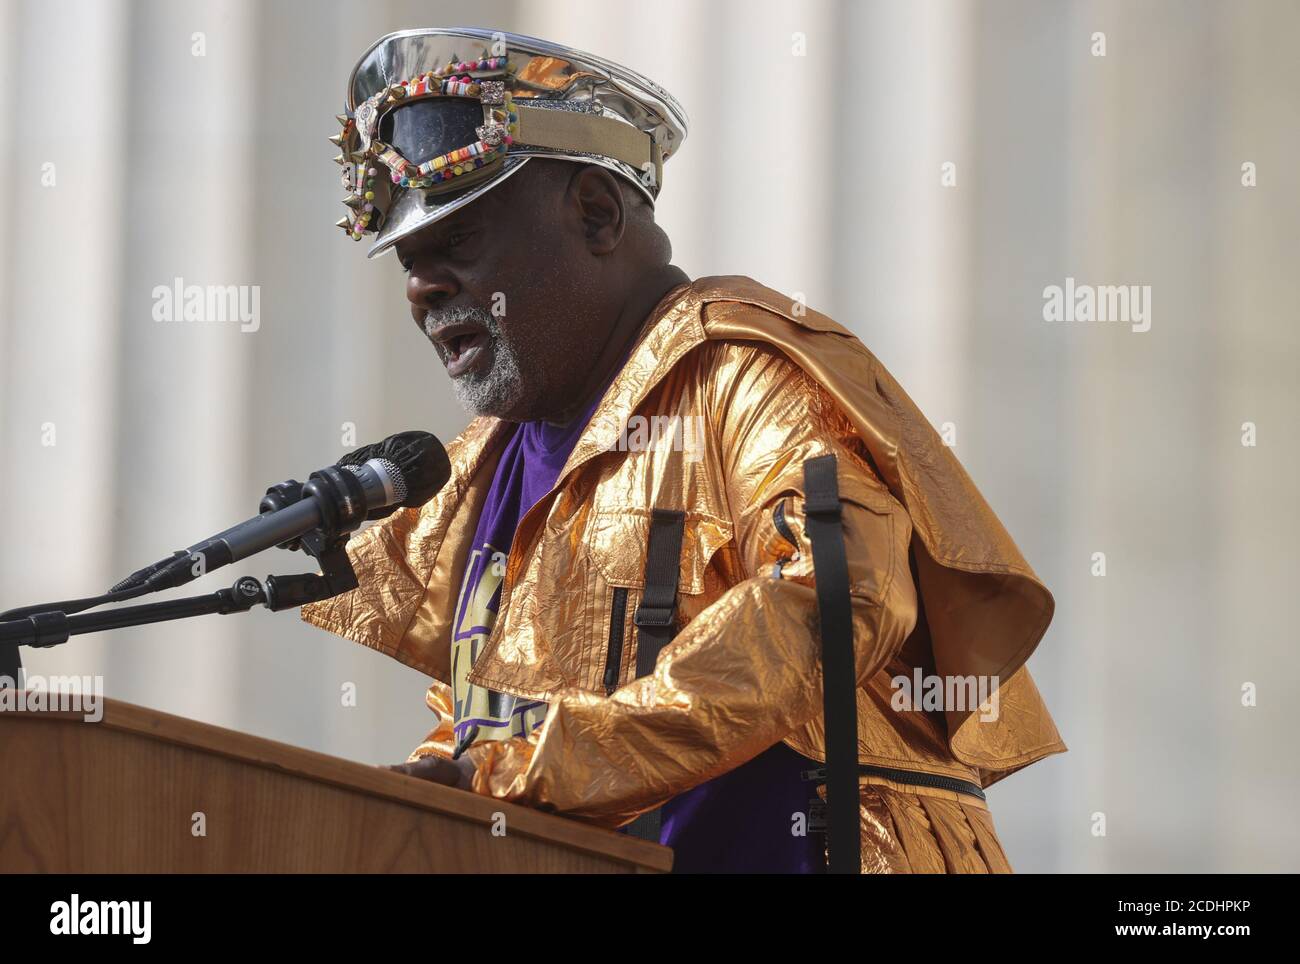 Washington, United States. 28th Aug, 2020. Singer and songwriter George Clinton of Parliament Funkadelic delivers remarks during the 'Commitment March: Get Your Knee Off Our Necks' civil rights rally in Washington, DC, on August 28, 2020. The 2020 March on Washington comes on the 57th anniversary of Dr. Martin Luther King's historic march, when he delivered his 'I Have a Dream' speech. Photo by Jonathan Earnst/UPI Credit: UPI/Alamy Live News Stock Photo